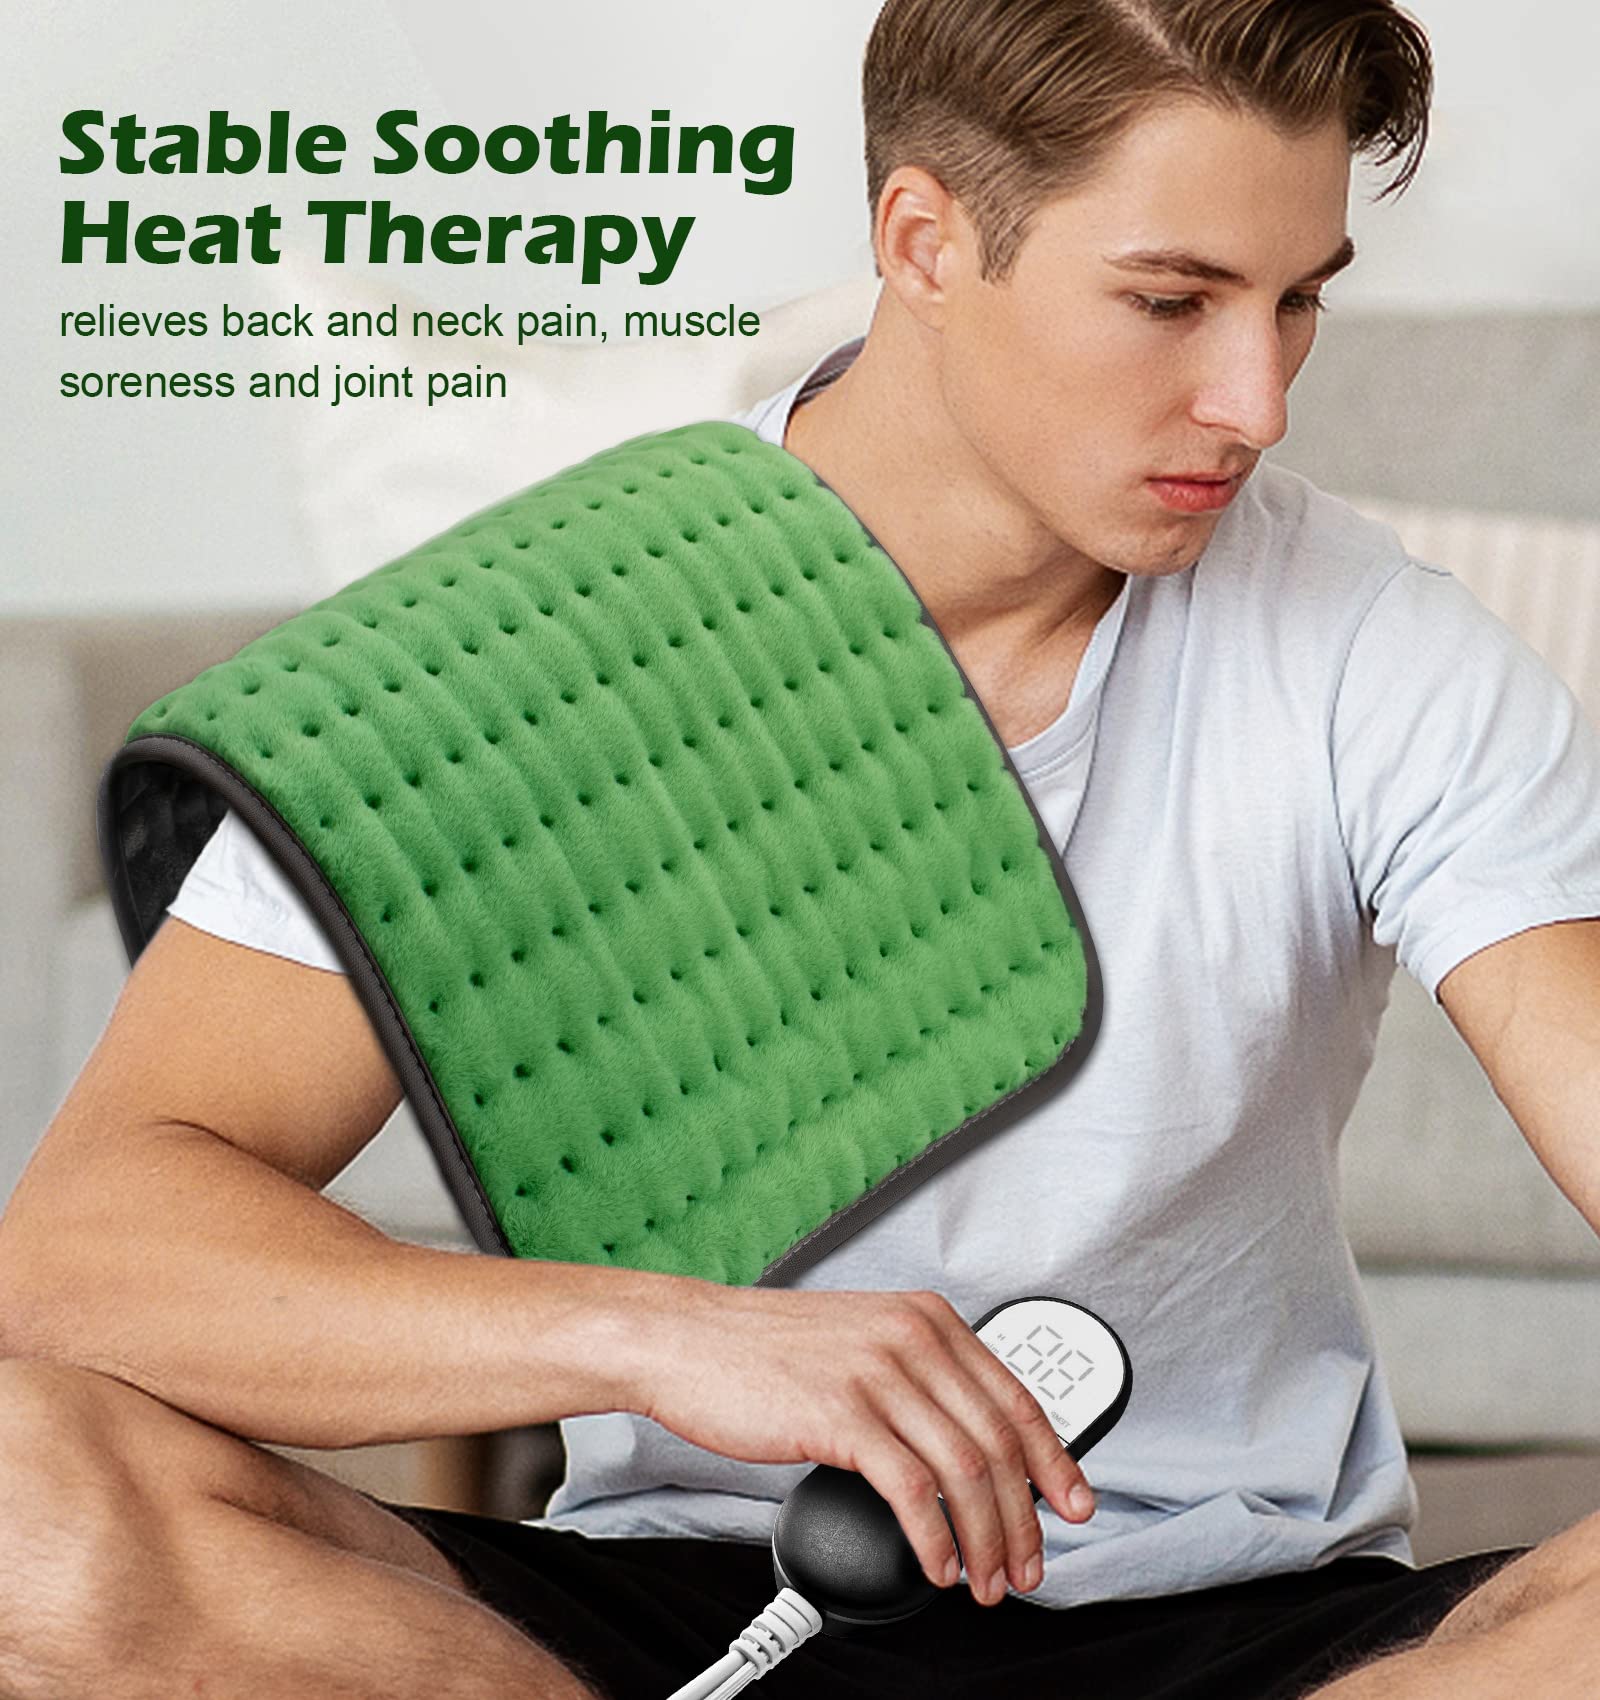 VALGELUIK Heating pad for Back Pain Relief, Heating Pads for Neck, Shoulder, Fathers Mothers Day Gifts for Women, Men, Dad, Mom, Auto-Off,Machine Washable, Moist Dry Heat Options, Extra Large 12